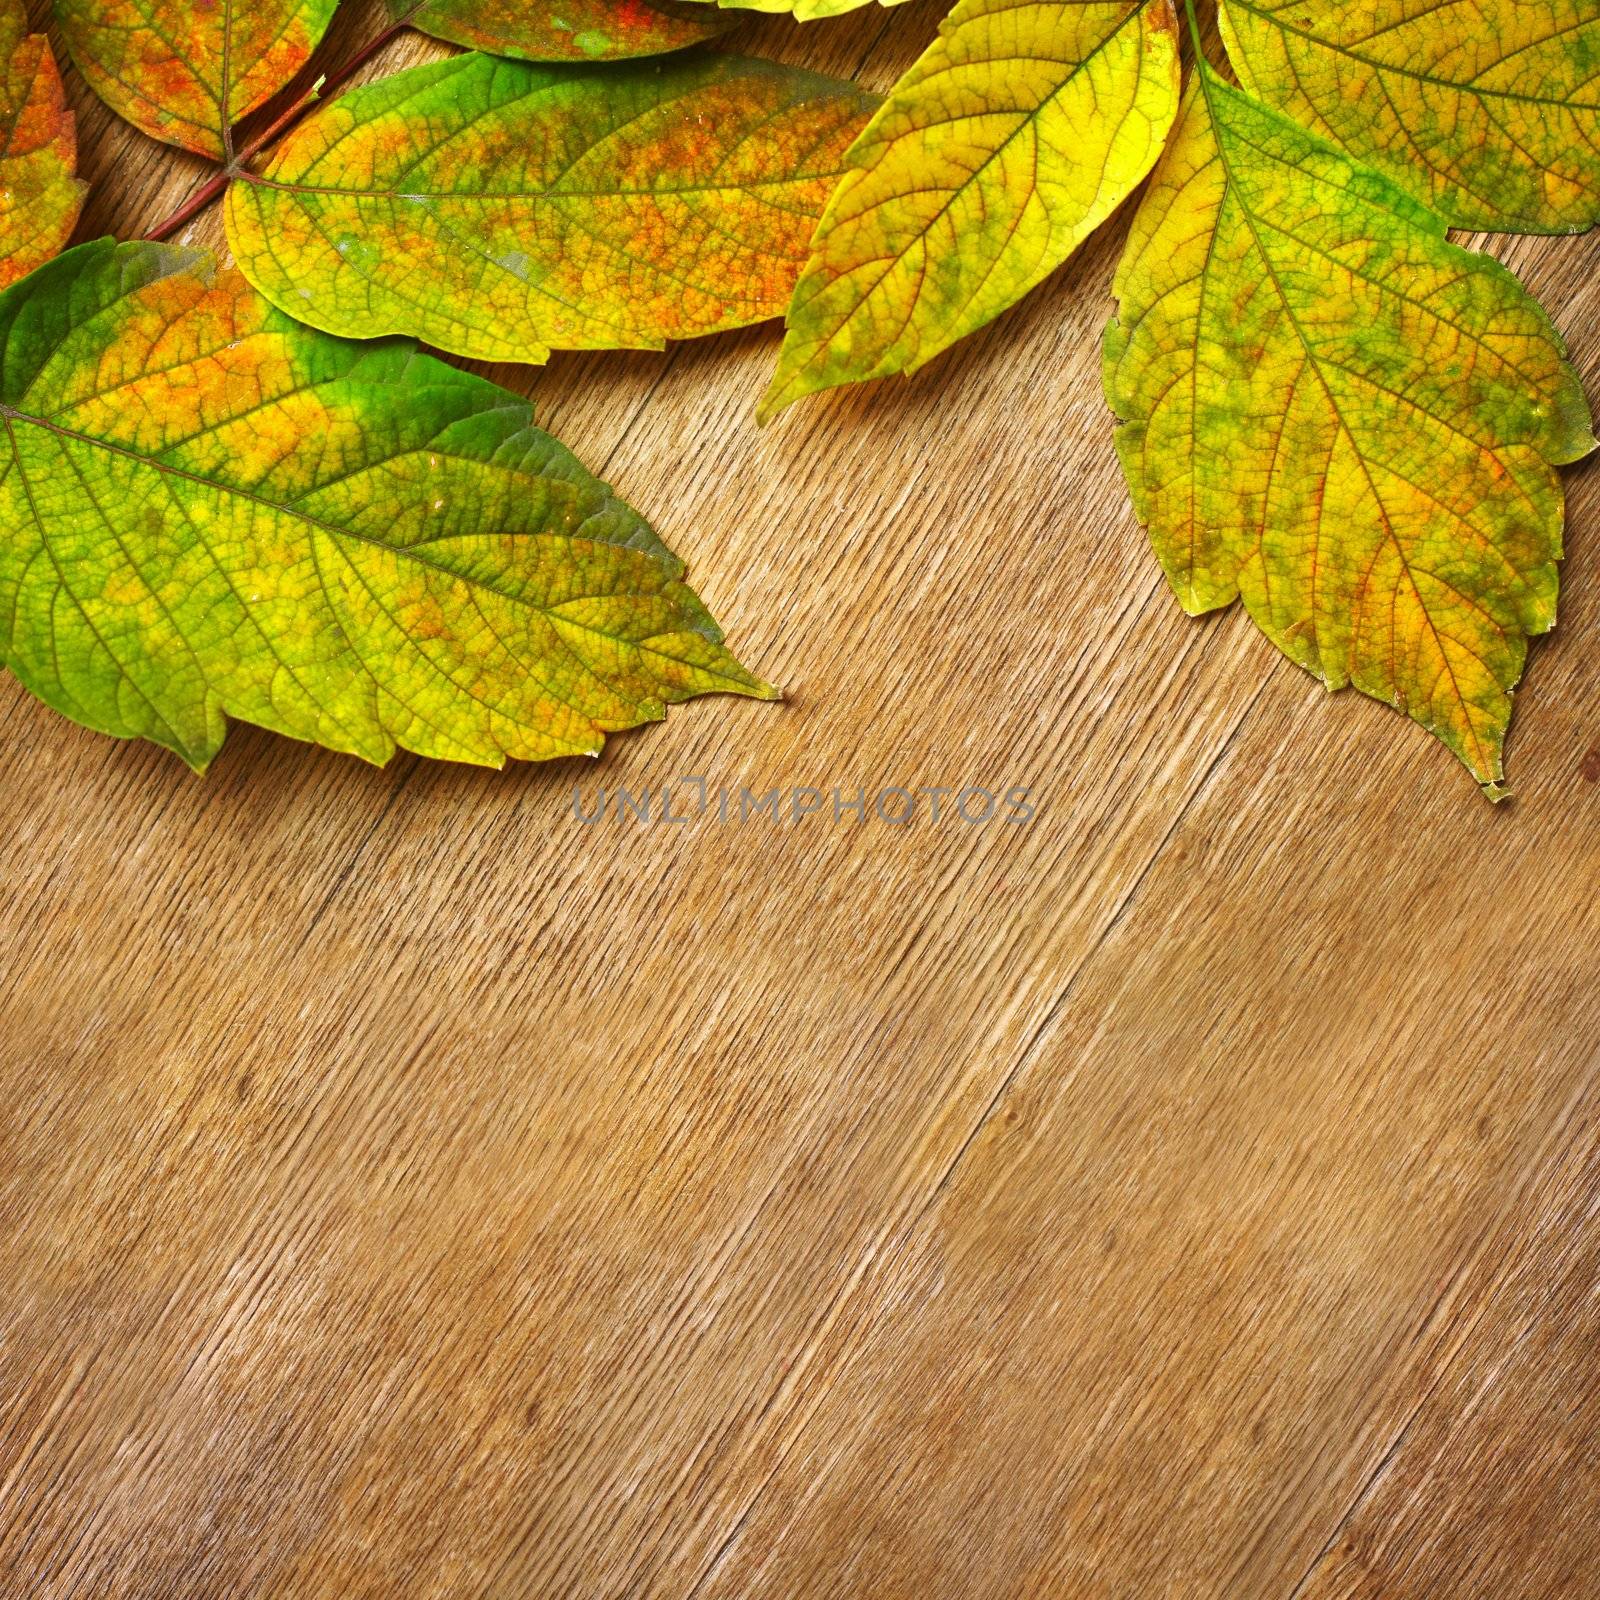 Autumn Leaves by anelina